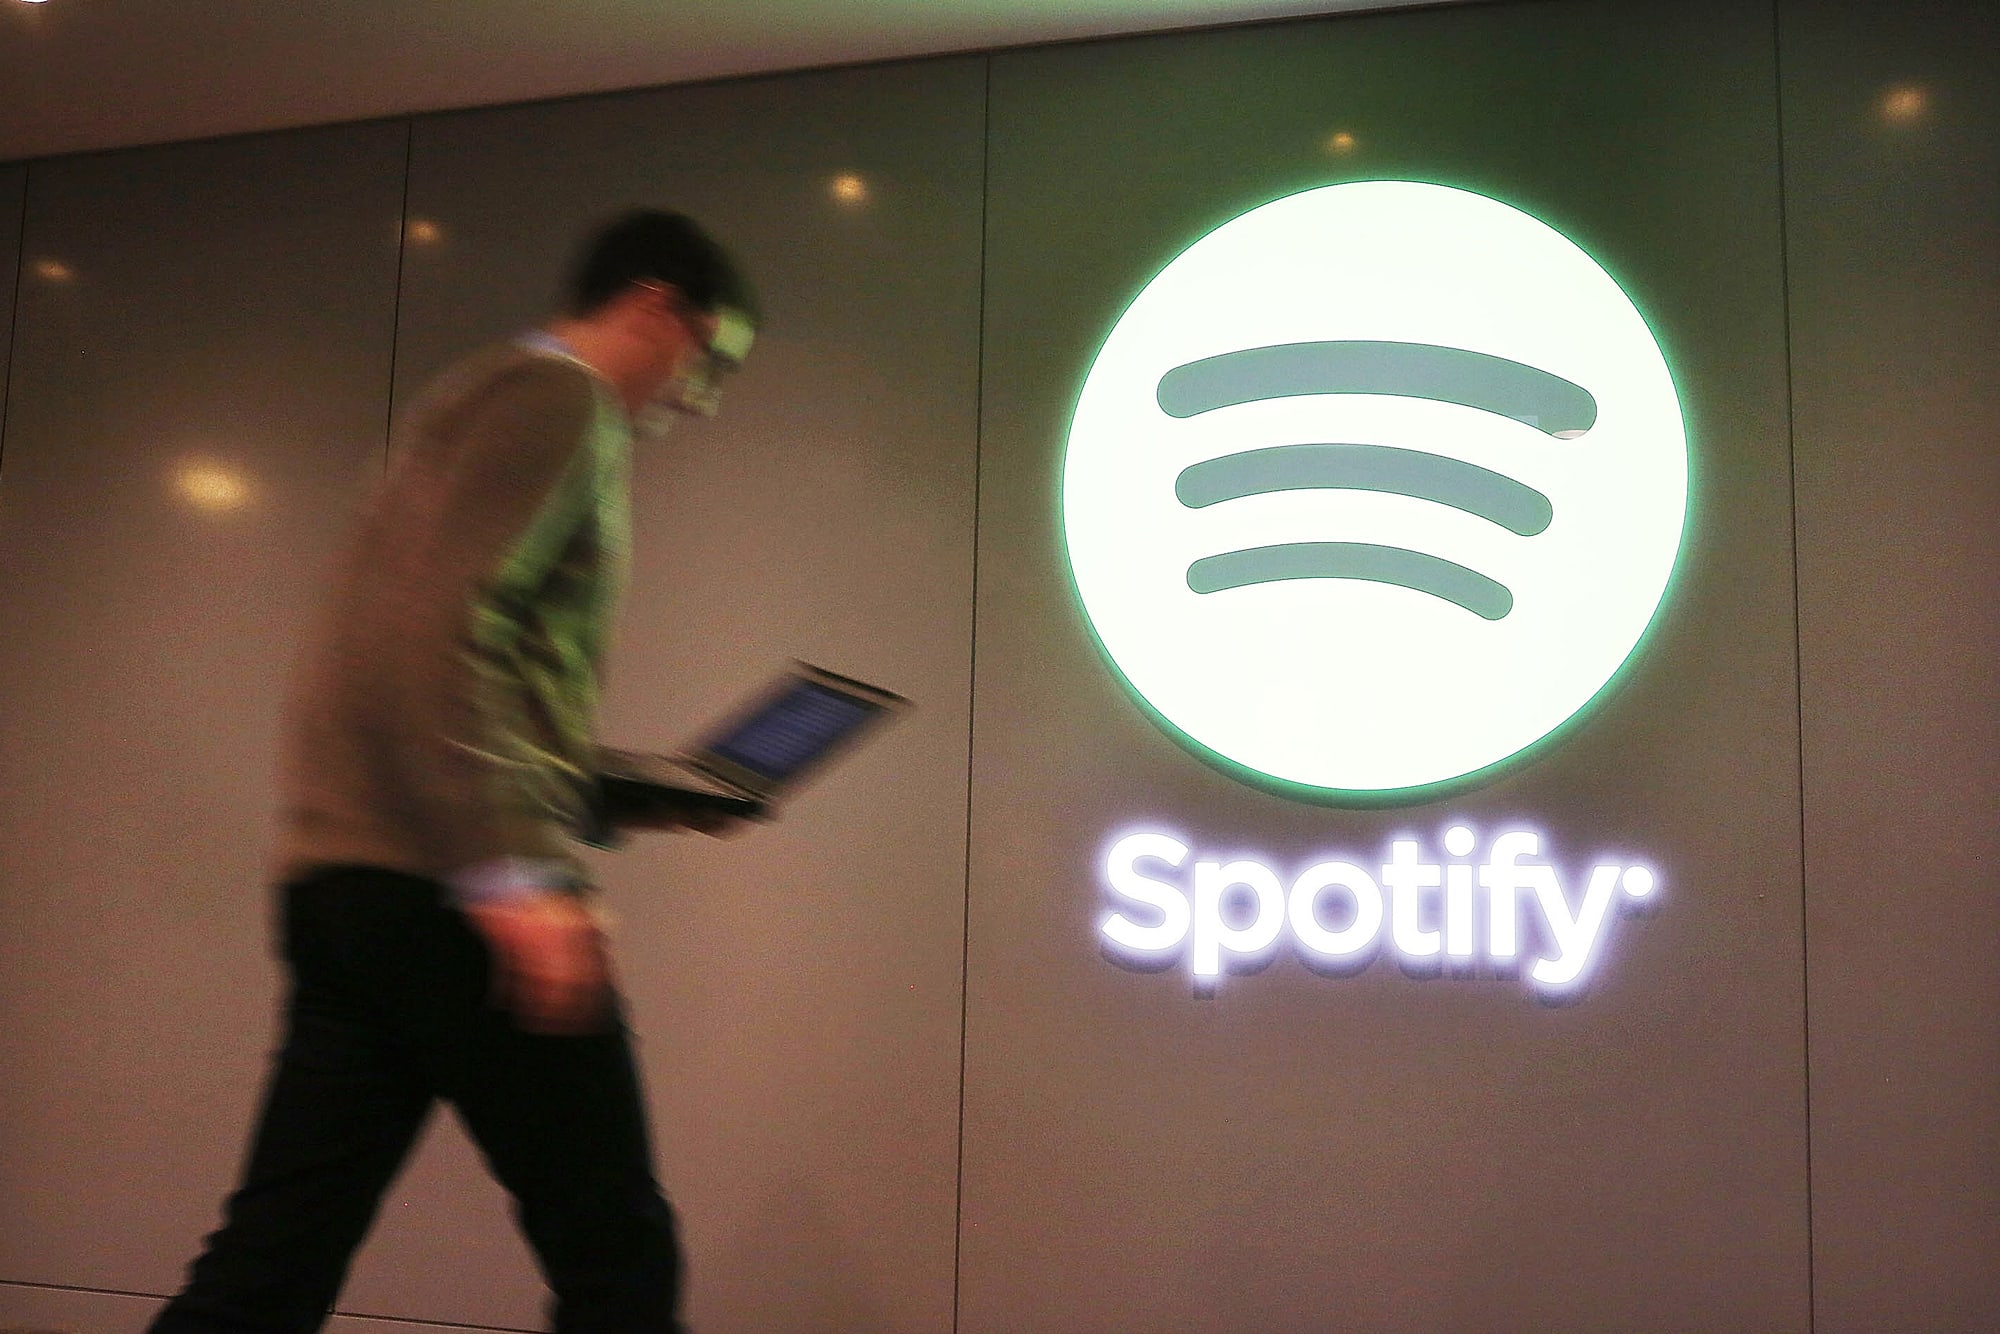 High analysts say shares like Qualcomm and Spotify have upside